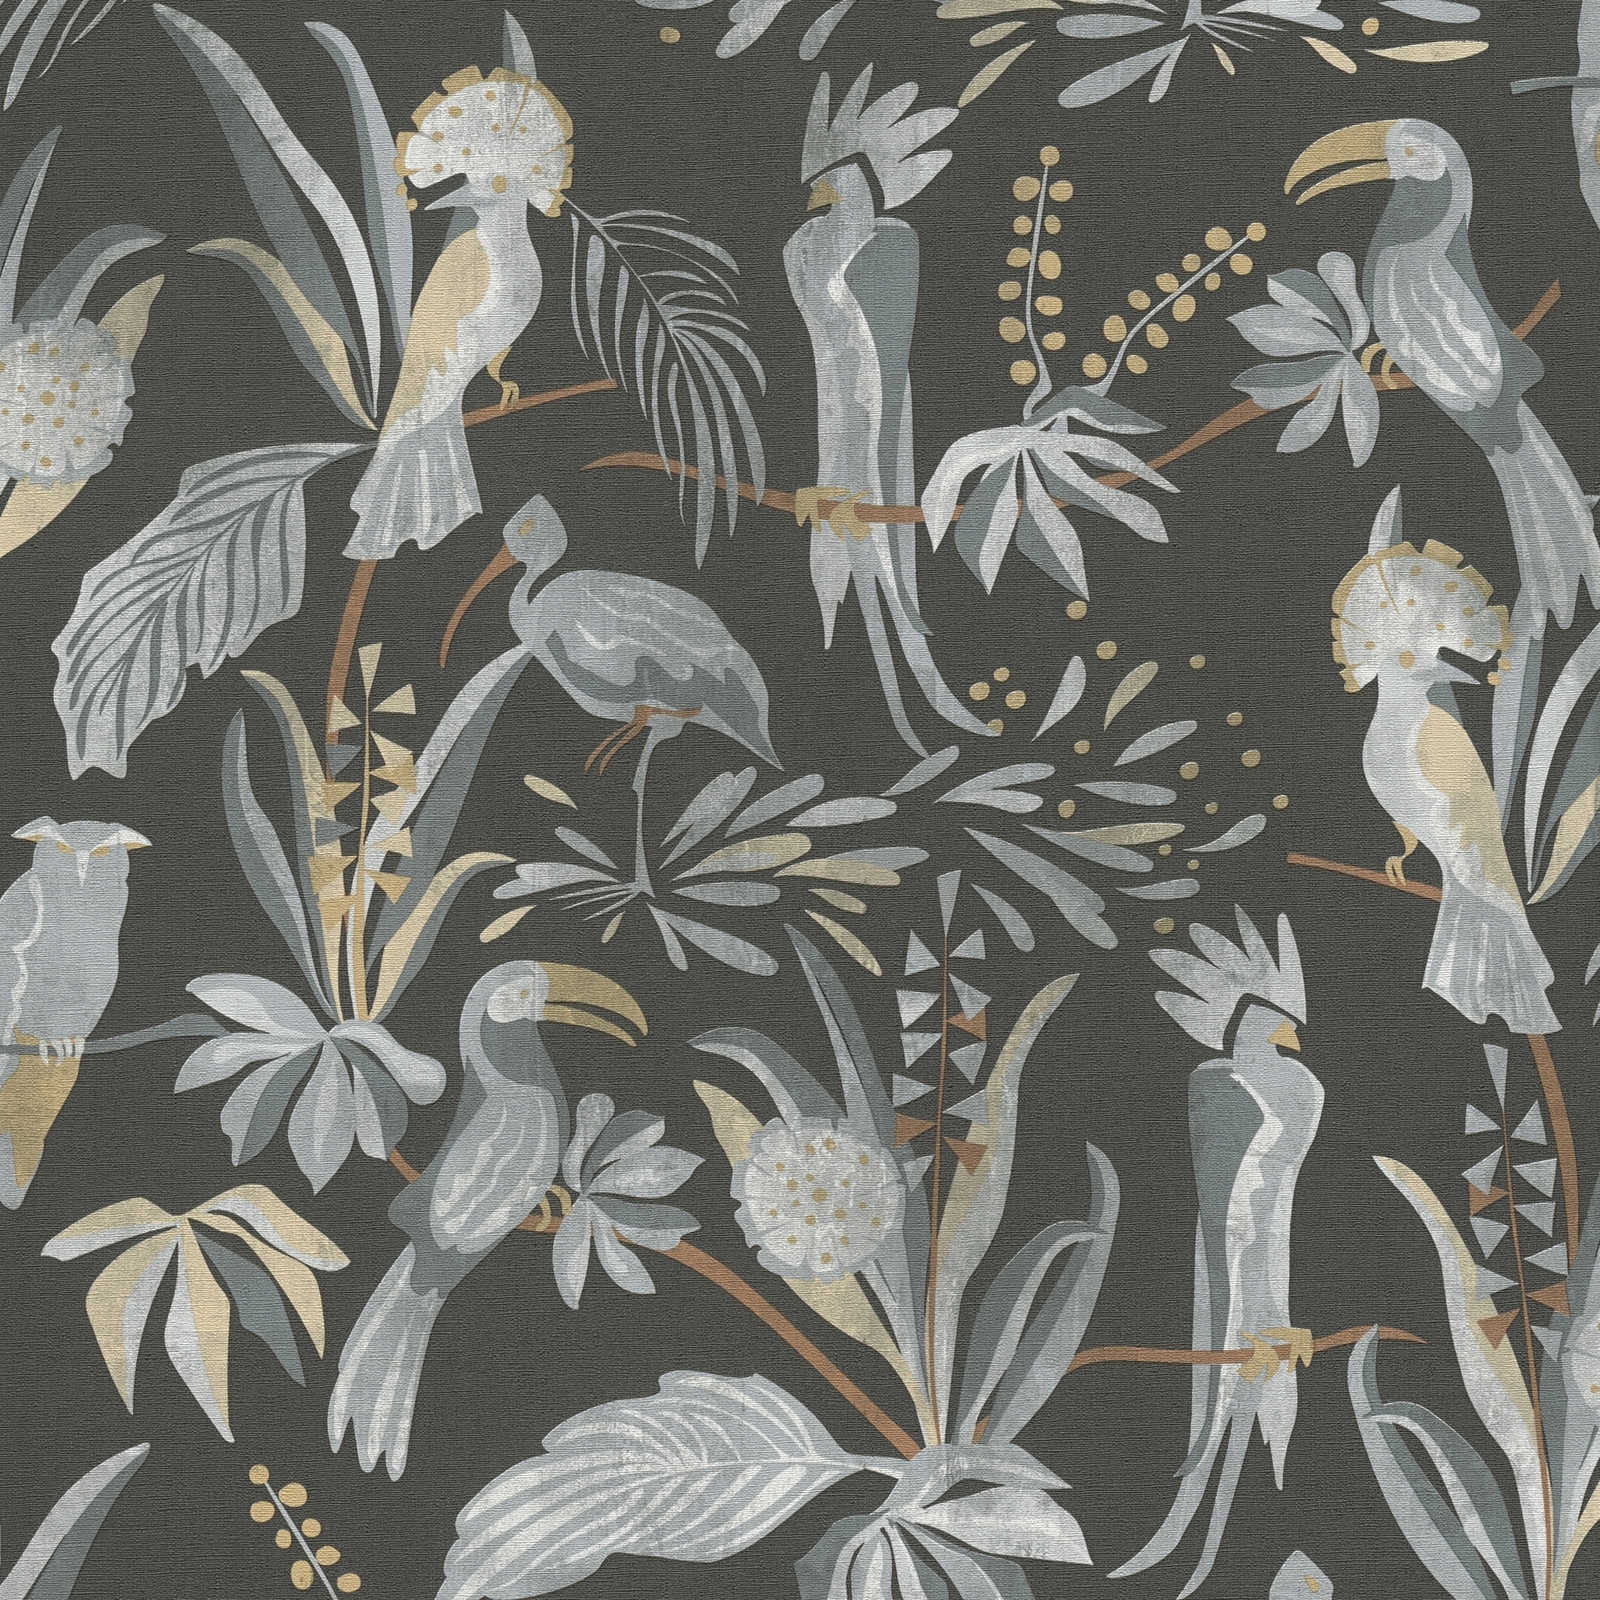             Wallpaper with jungle plants and birds - black, grey, beige
        